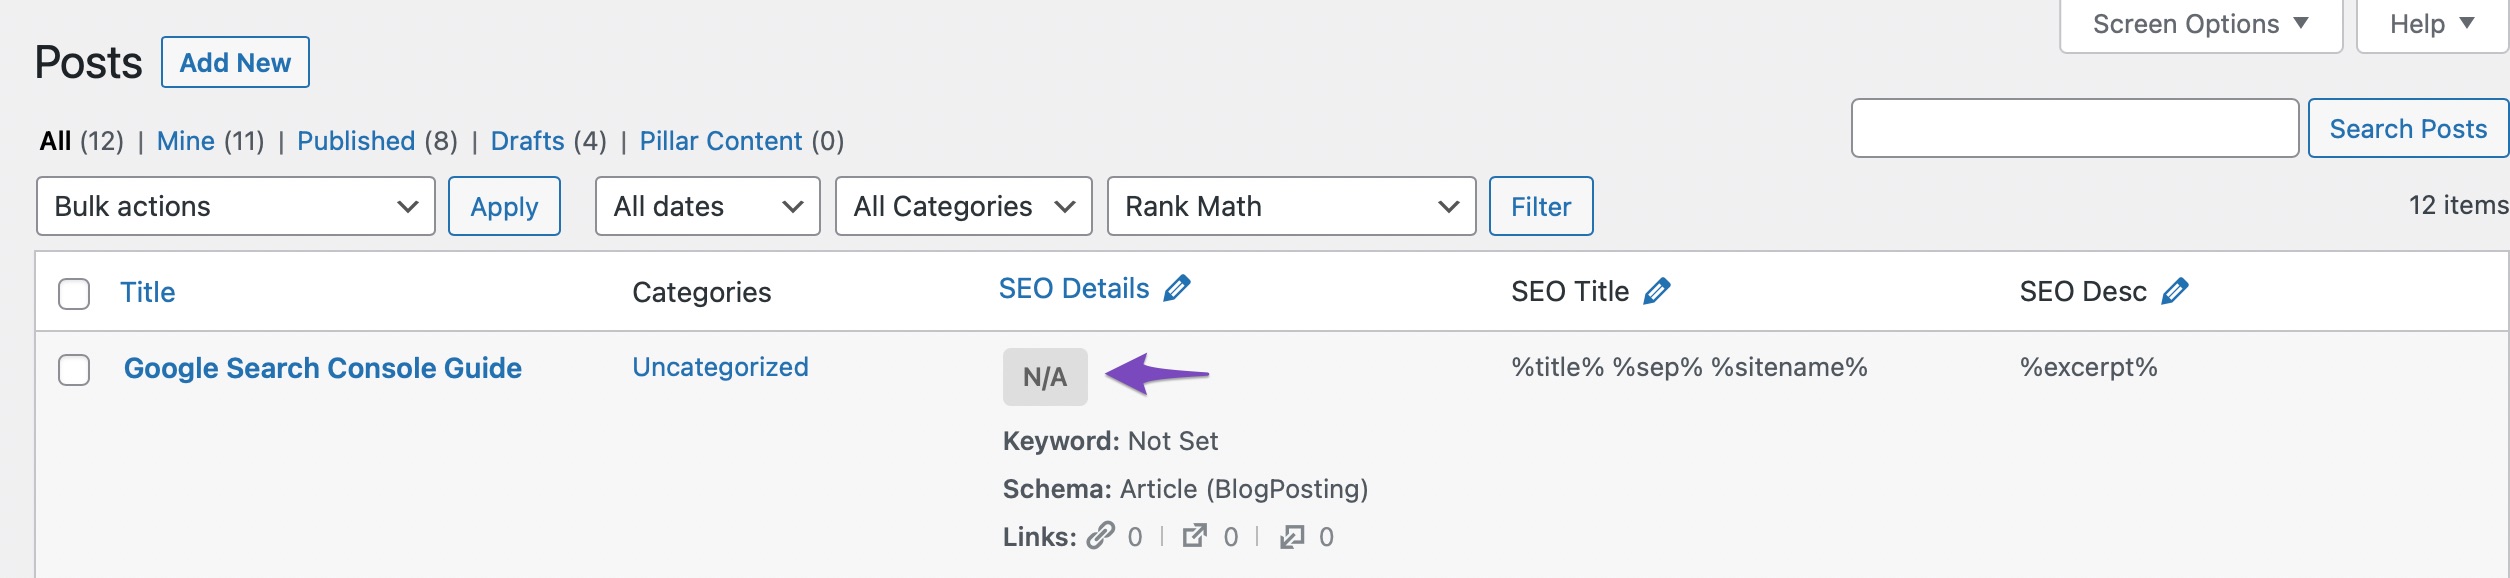 SEO Score N/A when focus keywords are imported from other SEO Plugin